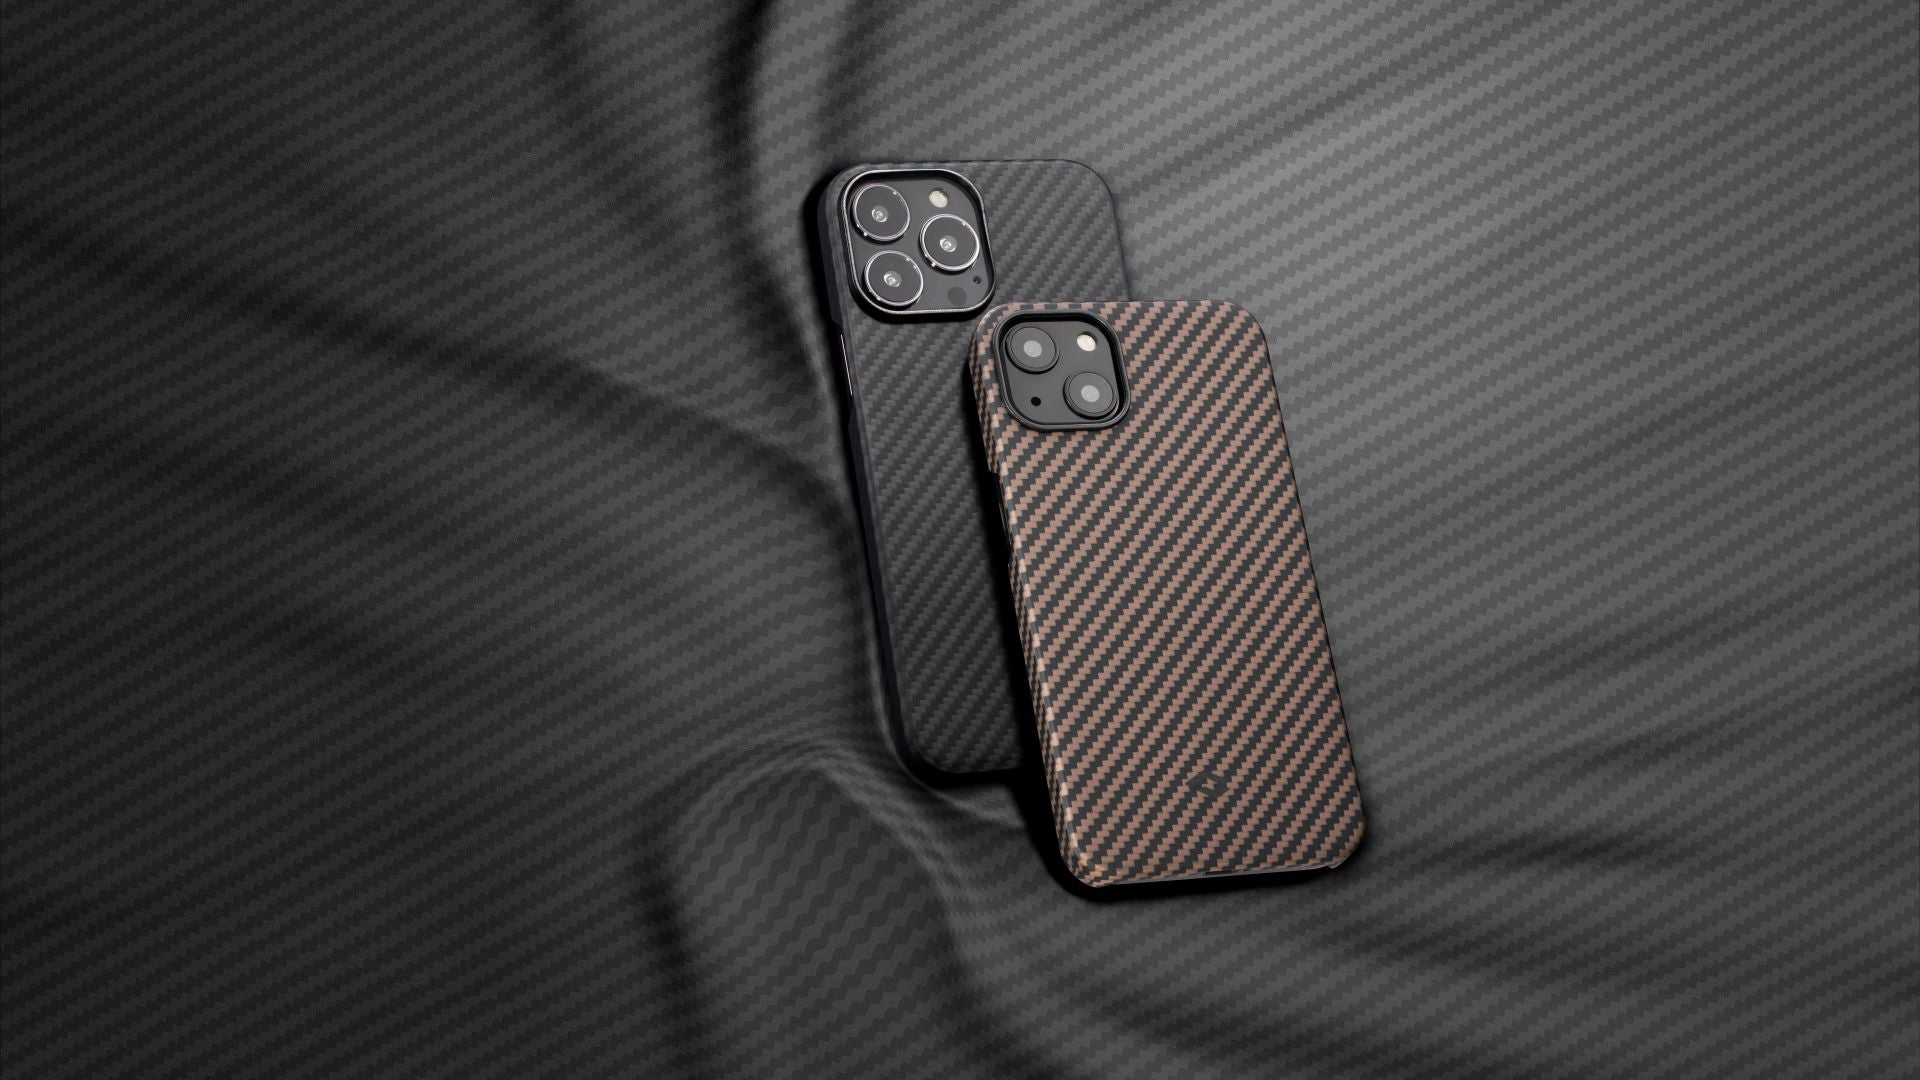 Best iPhone 8 cases: protect your all-glass iPhone